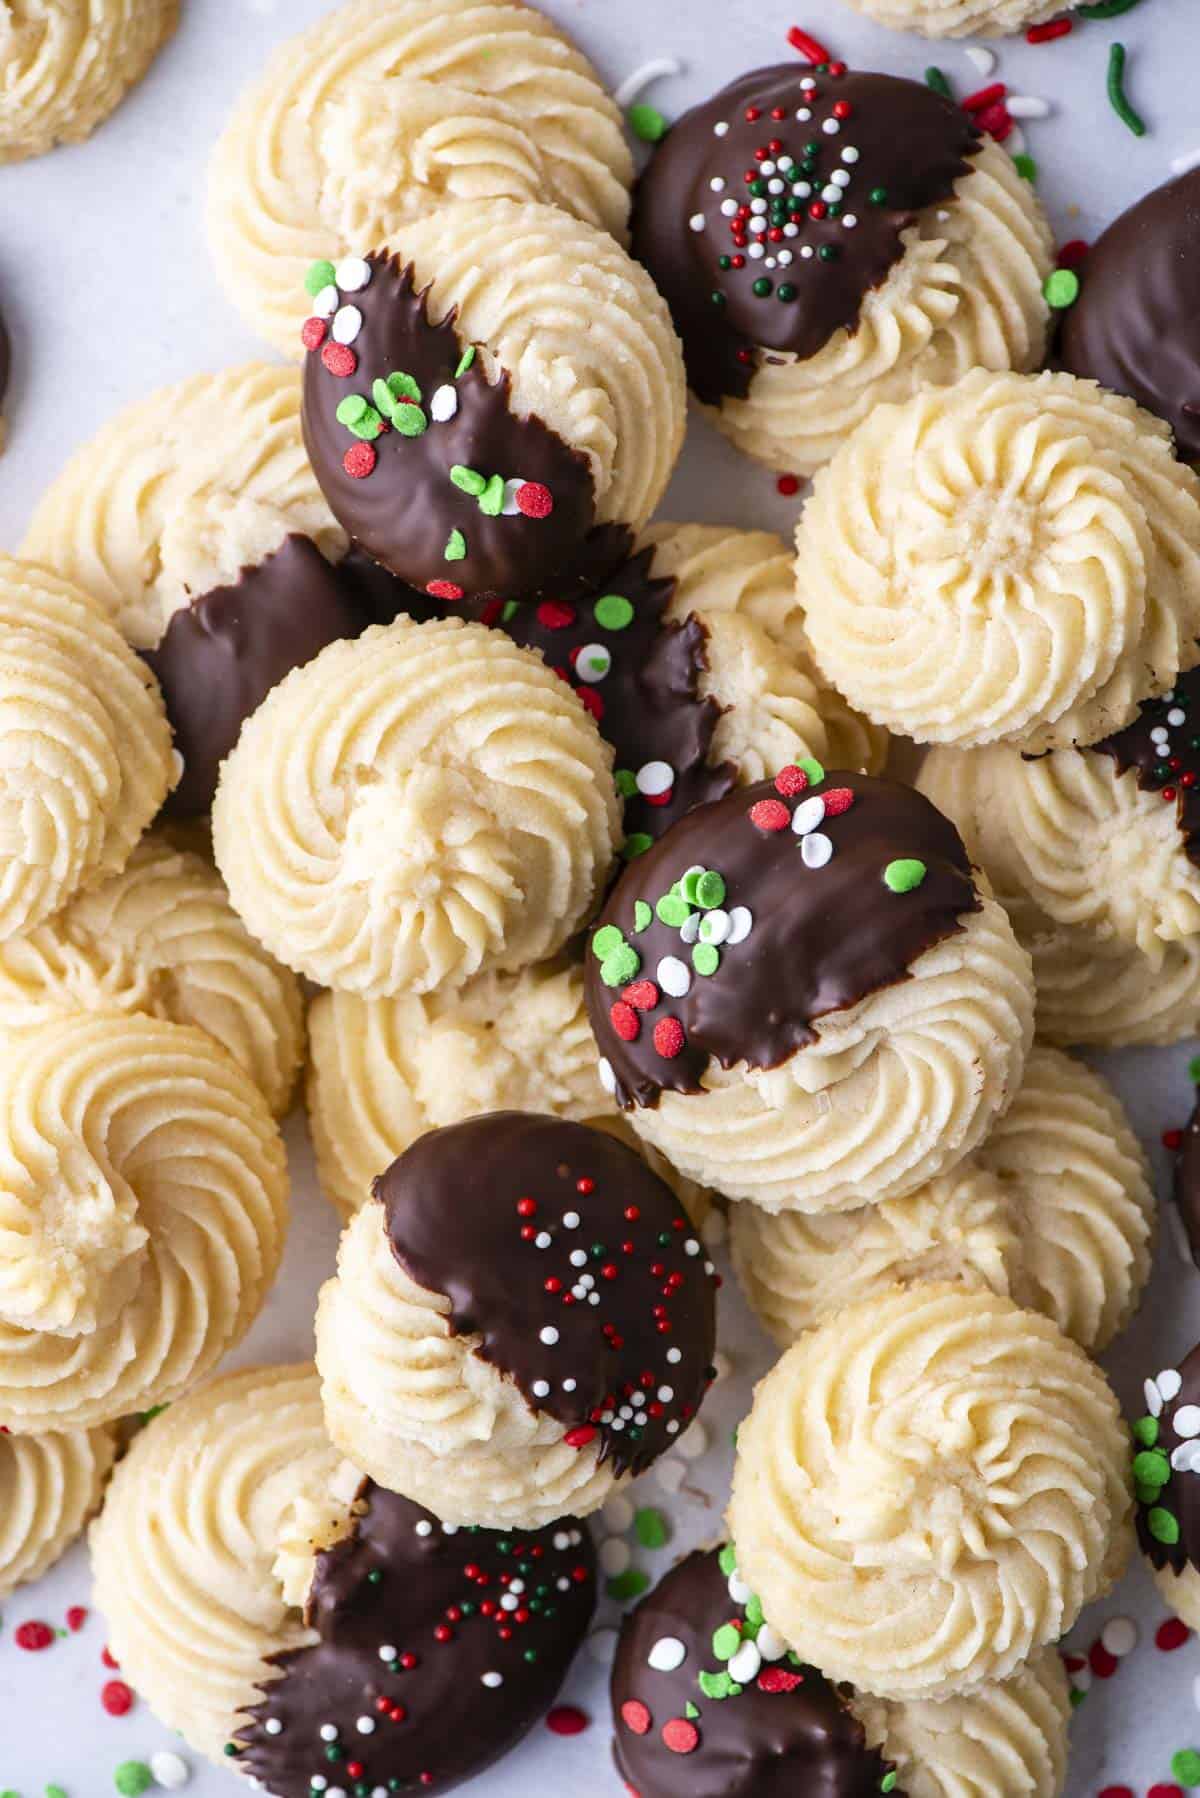 An assortment of butter cookies piled on parchment paper, some plain cookies, some dipped in chocolate and some dipped in chocolate with red, green and white sprinkles